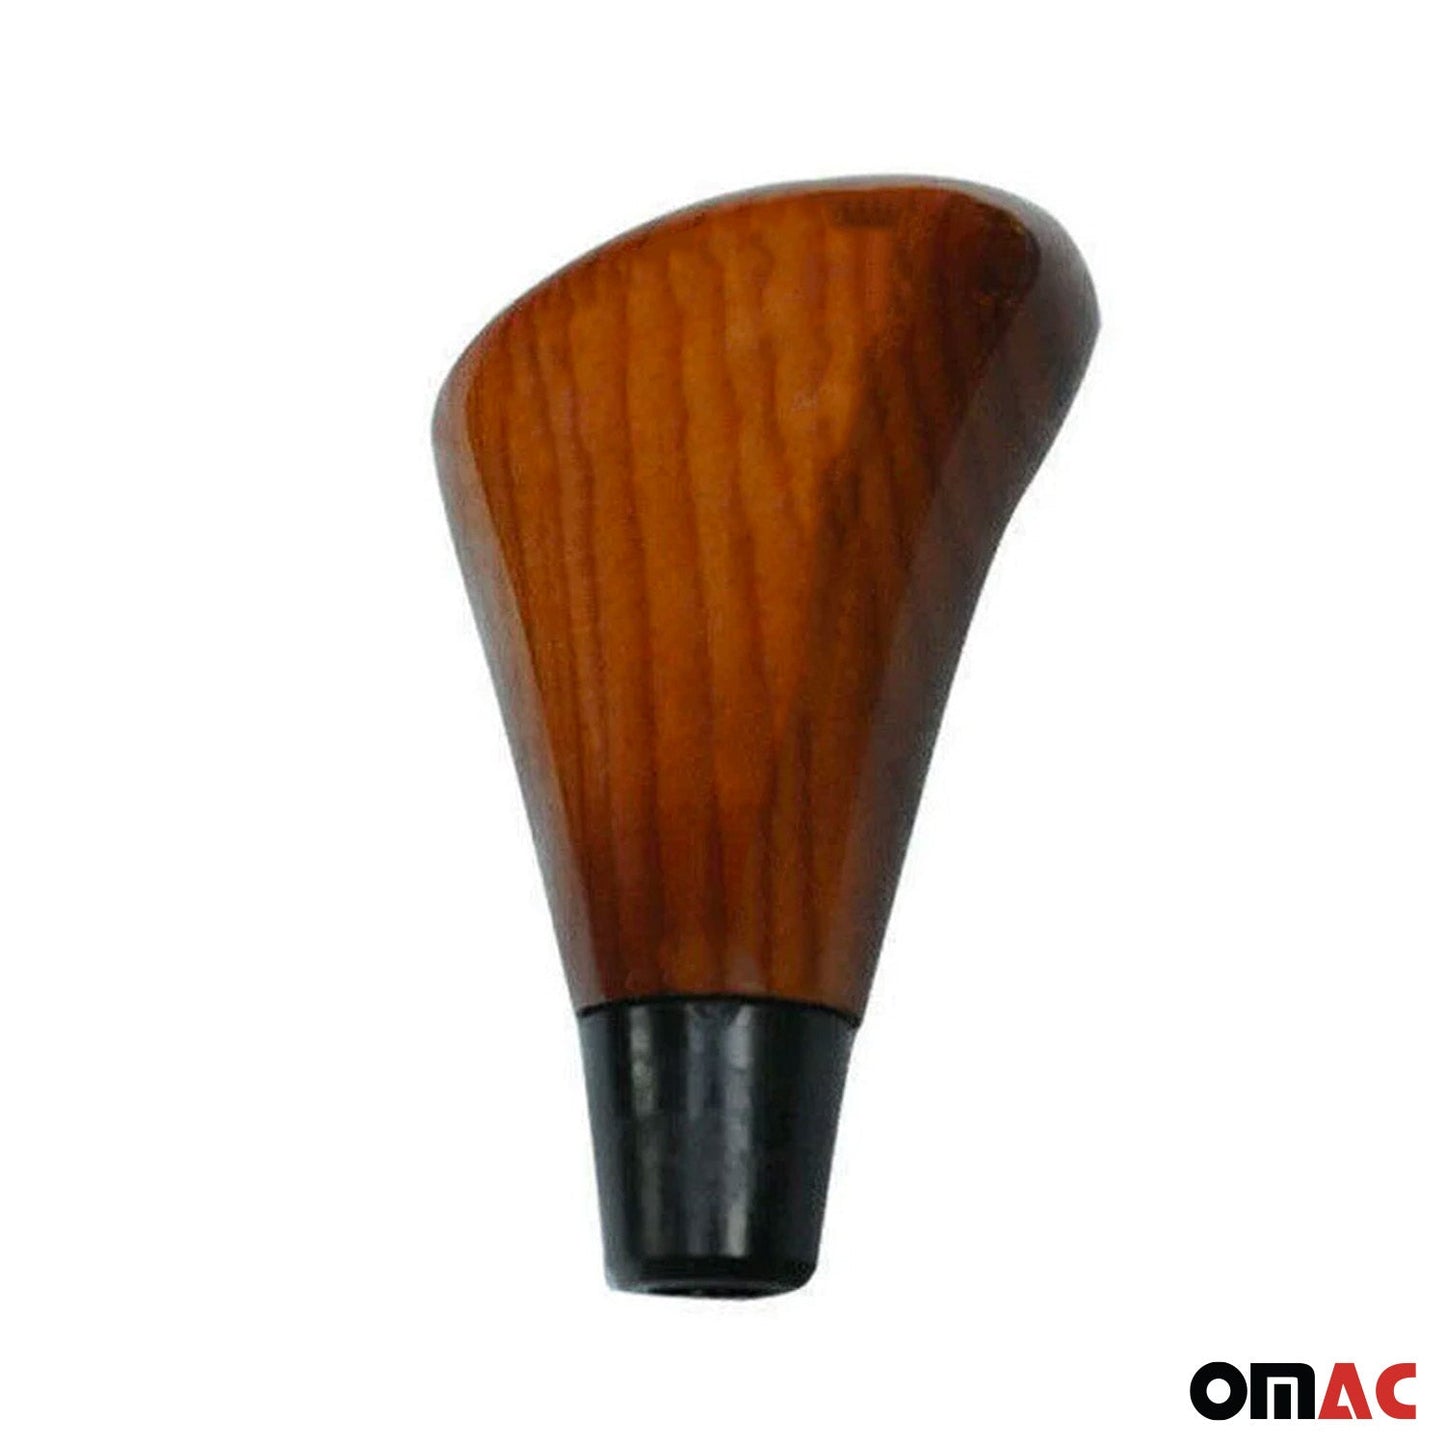 OMAC Wooden Gear Shift Shifter Knob With Numbers For Mercedes E-Class W211 2003-2009 U003658